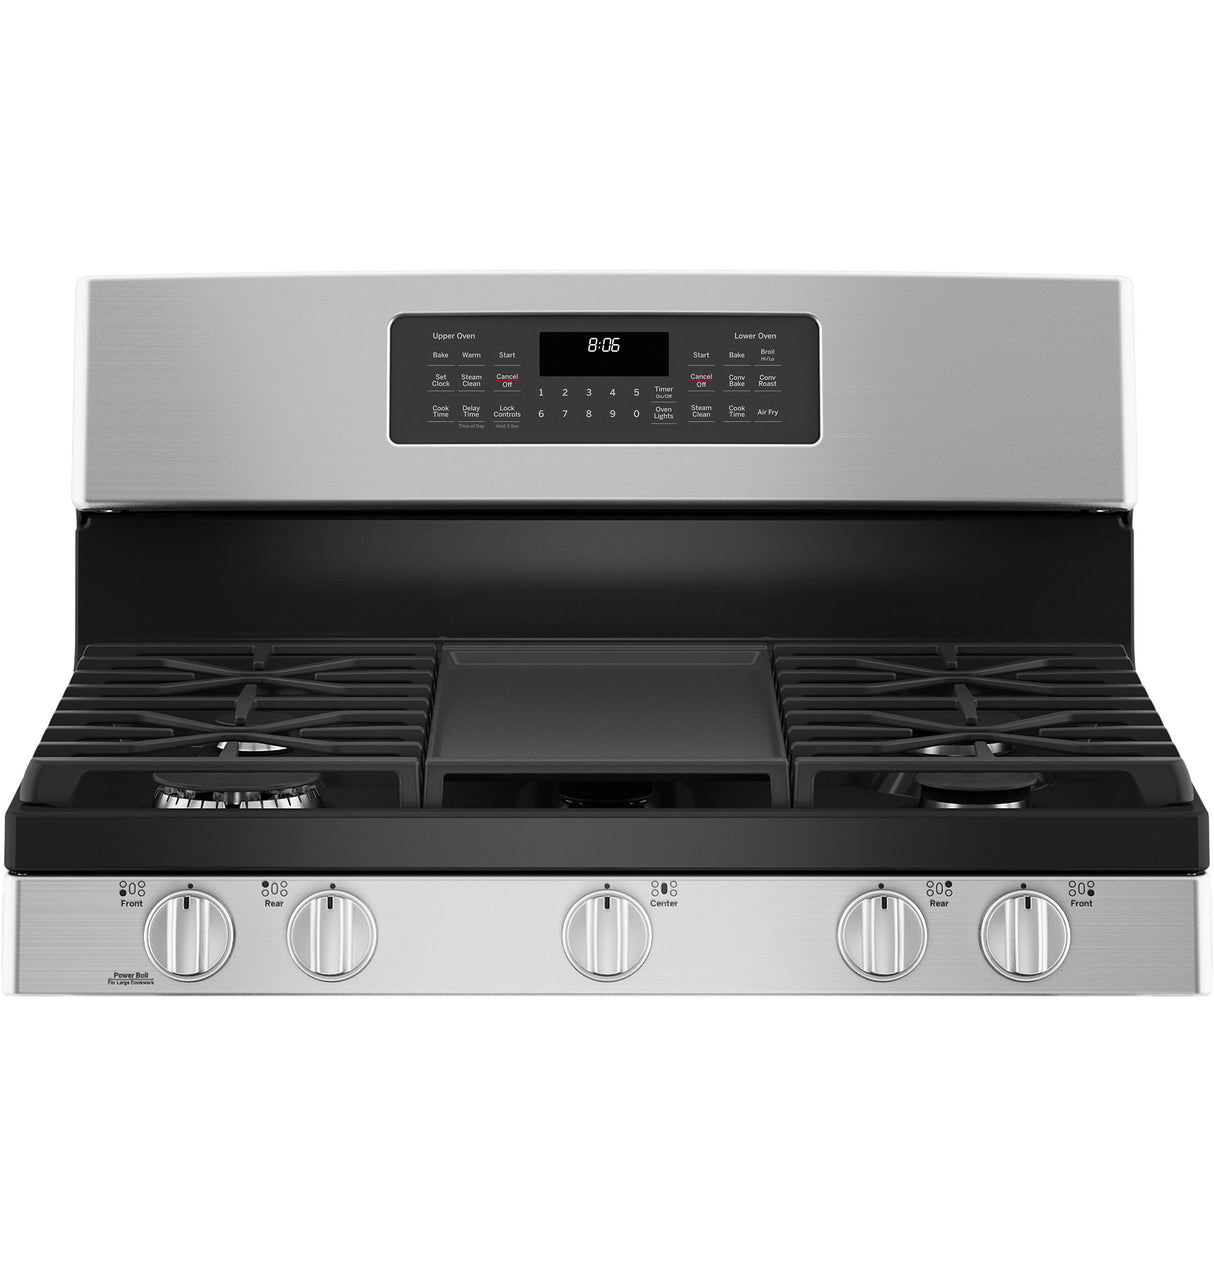 GE(R) 30" Free-Standing Gas Double Oven Convection Range - (JGBS86SPSS)